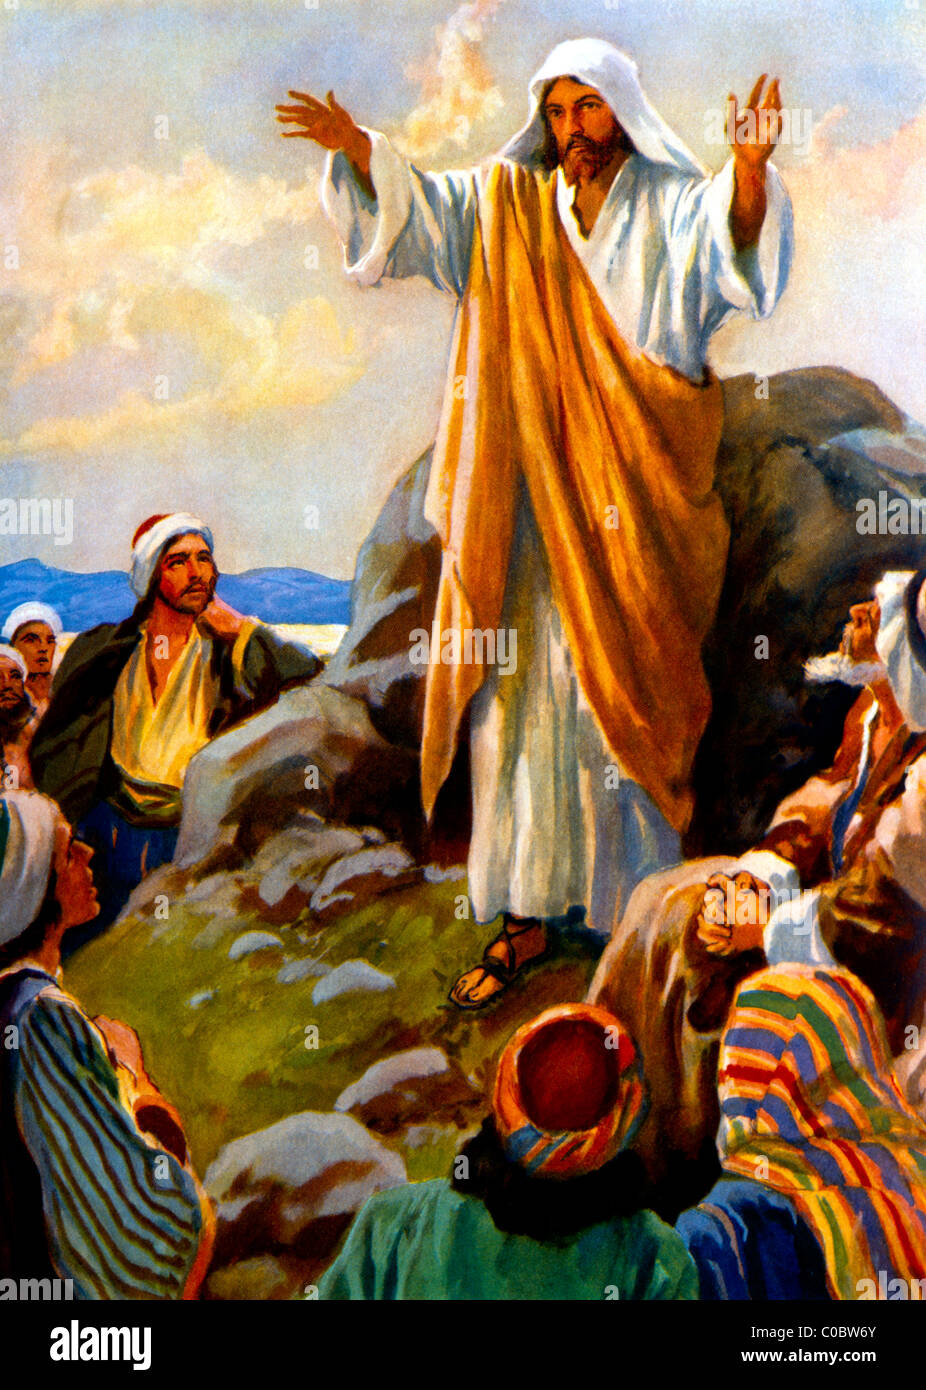 The Sermon On The Mount Bible Story Painting By Henry Coller Stock Photo